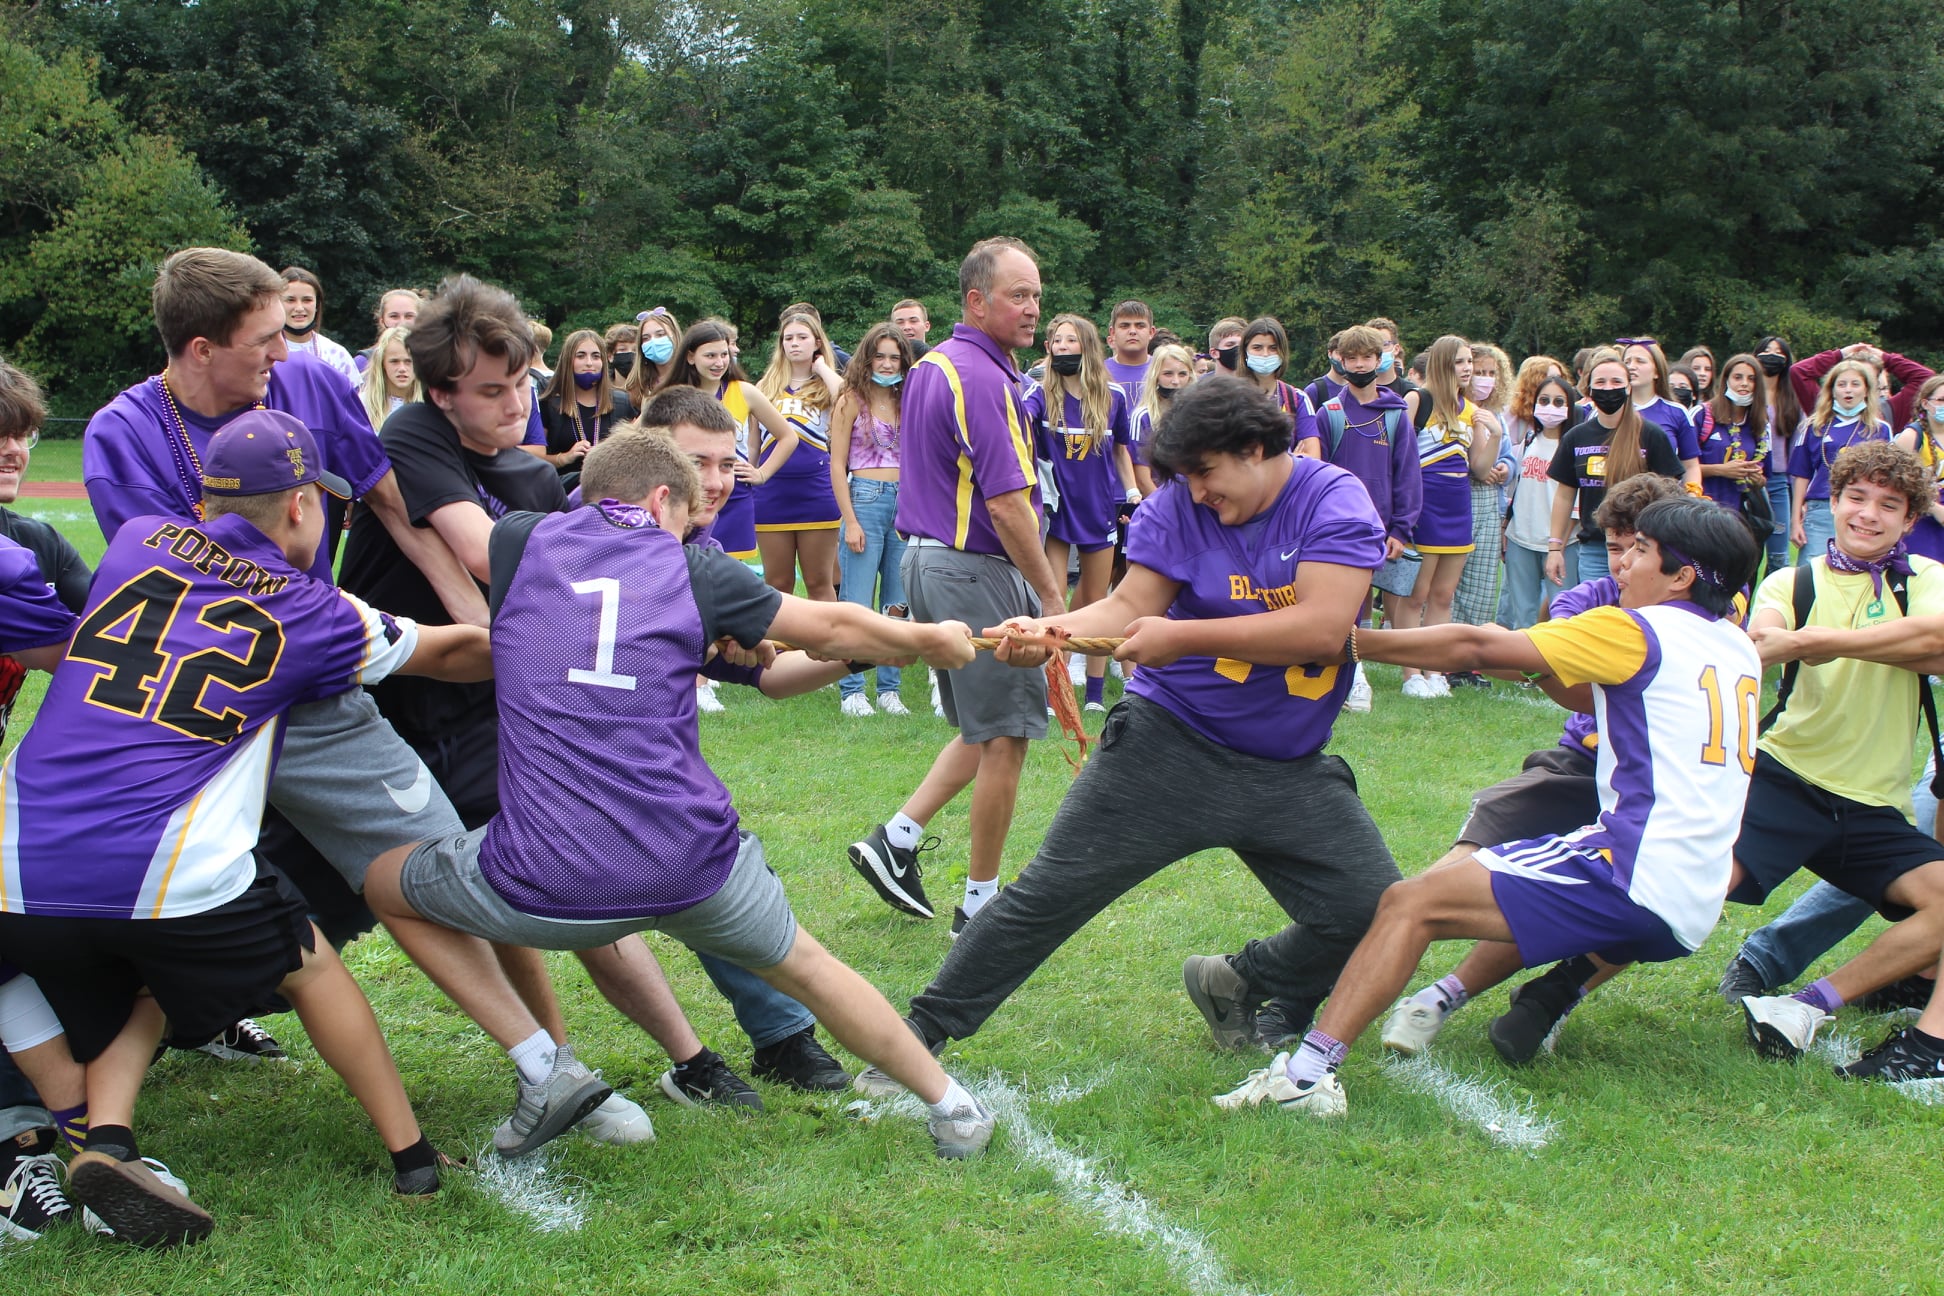 students playing tug of war with crowd watching